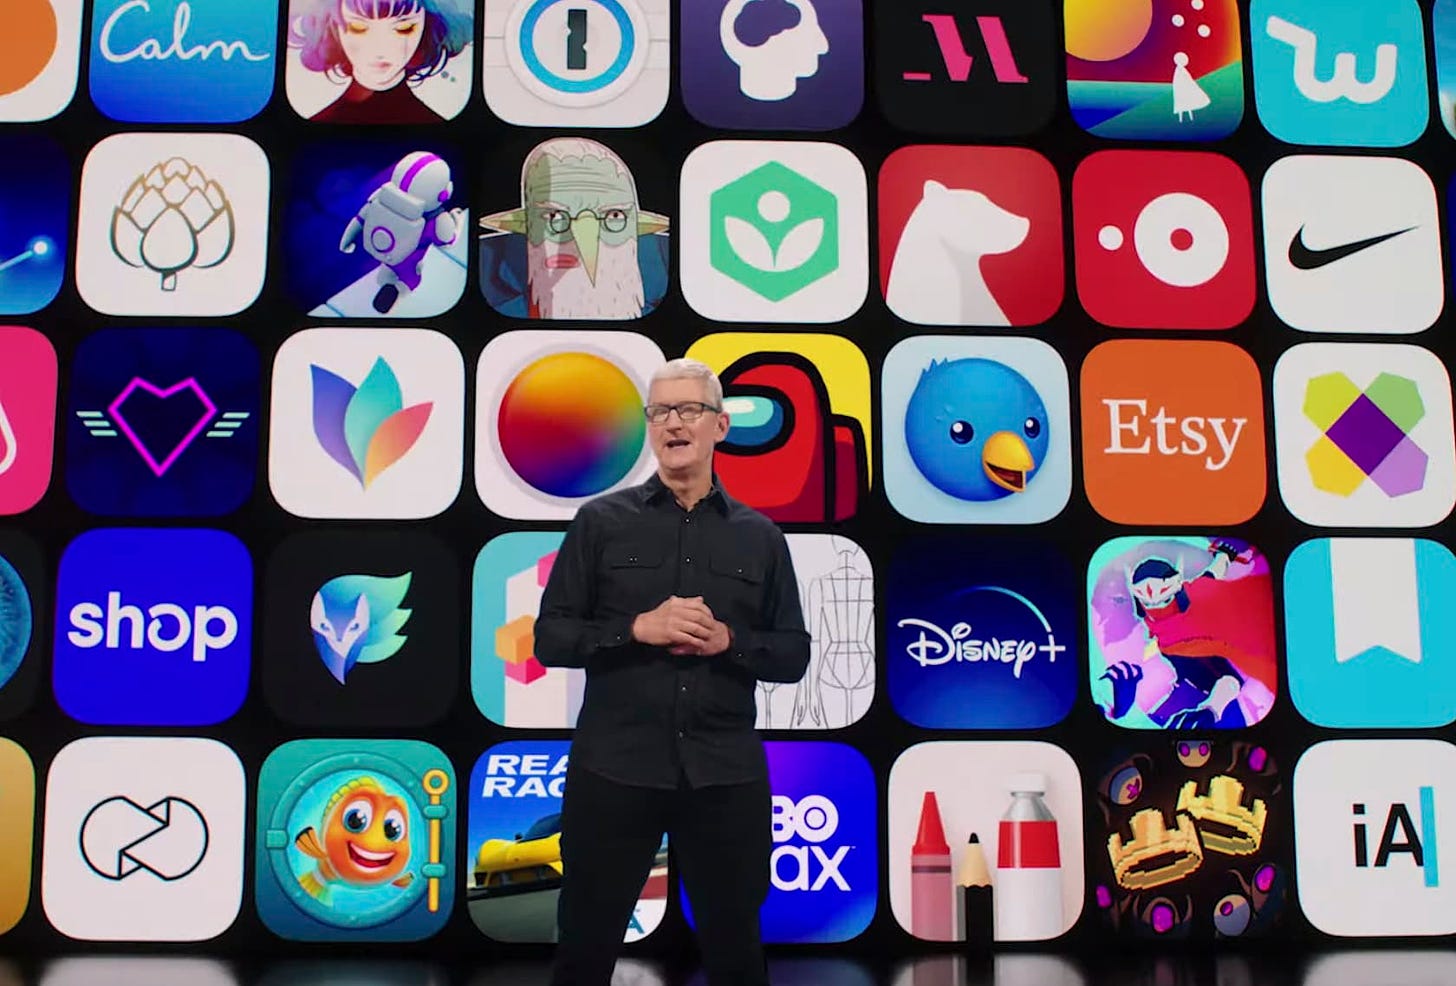 Developers building ways to skirt Apple's cut of in-app purchases